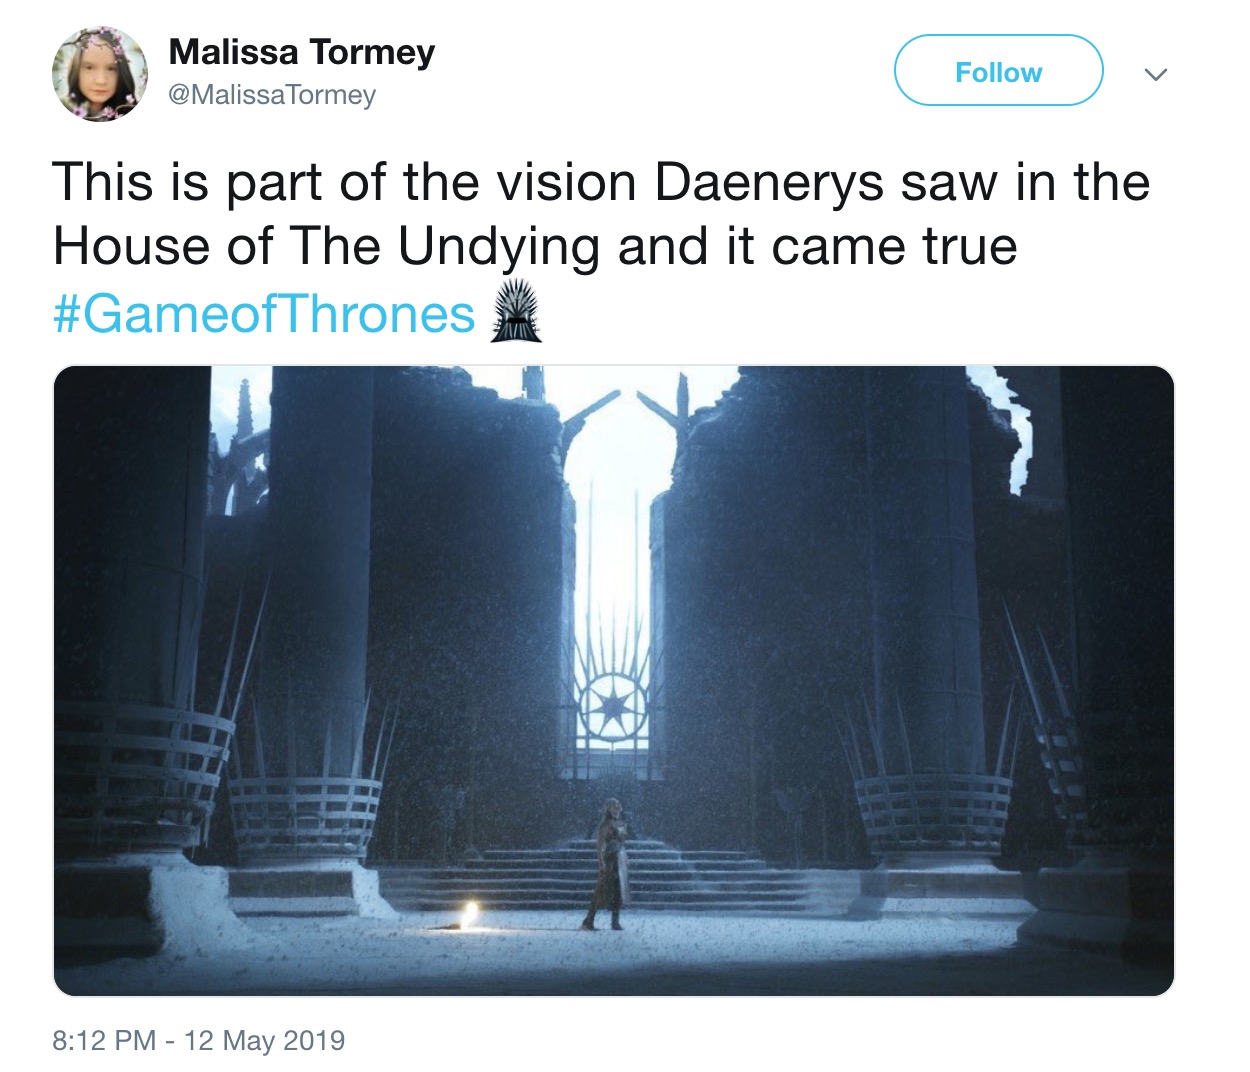 Game of Thrones Season 8 Episode 5 memes - presentation - Malissa Tormey This is part of the vision Daenerys saw in the House of The Undying and it came true